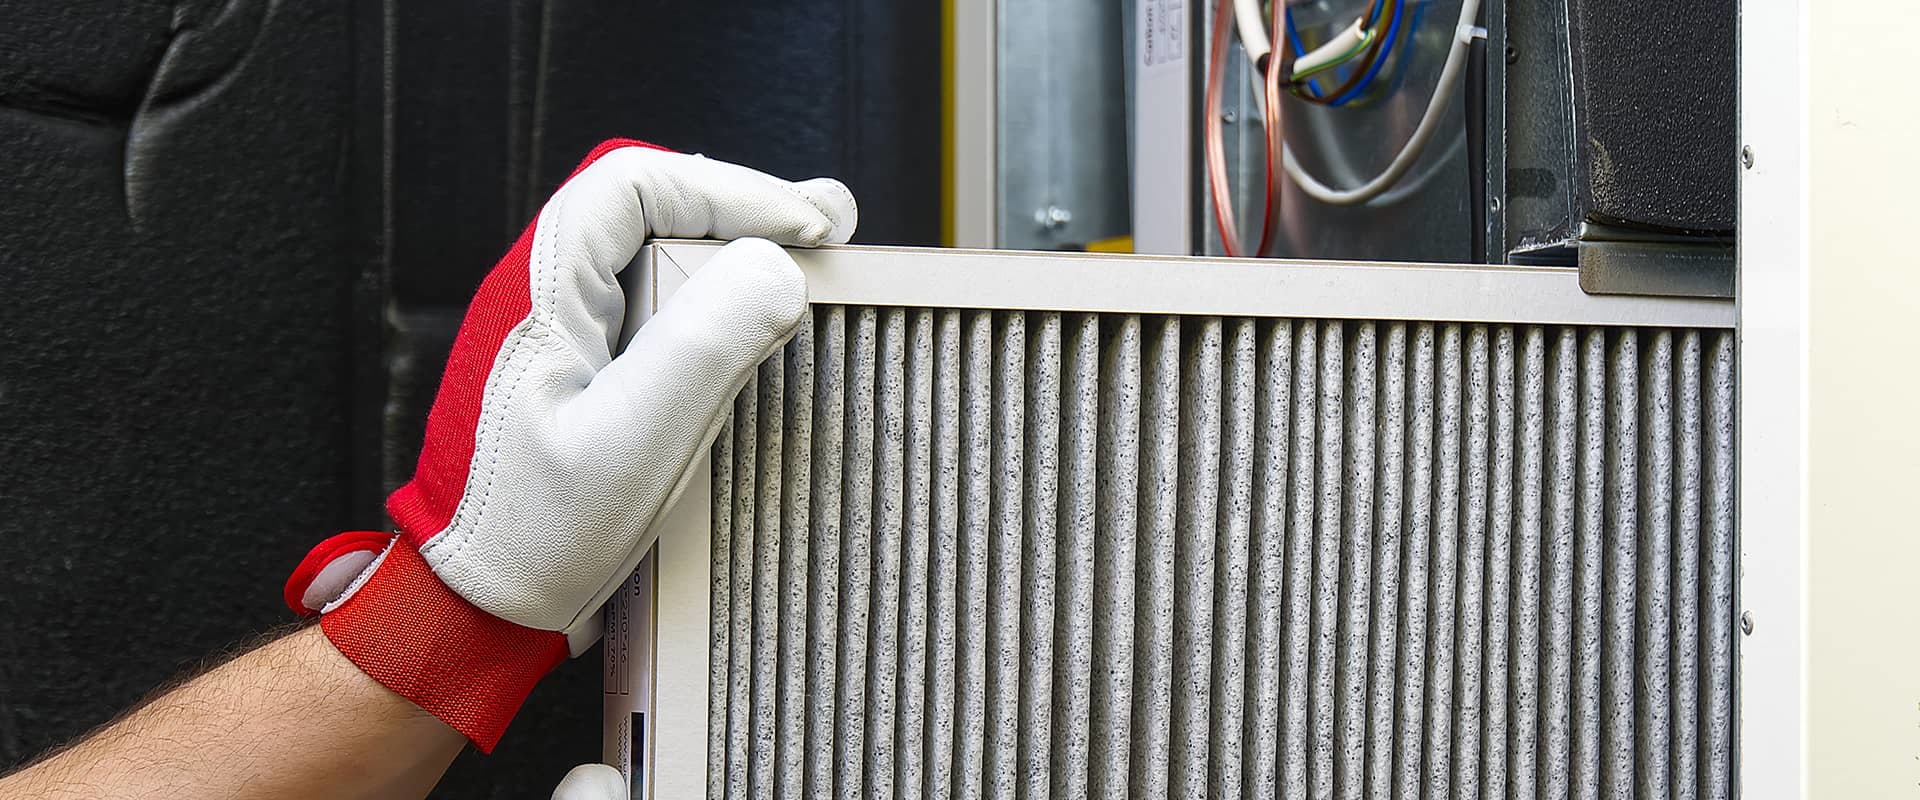 Comparing Duct Repair Services Available in Bal Harbour FL